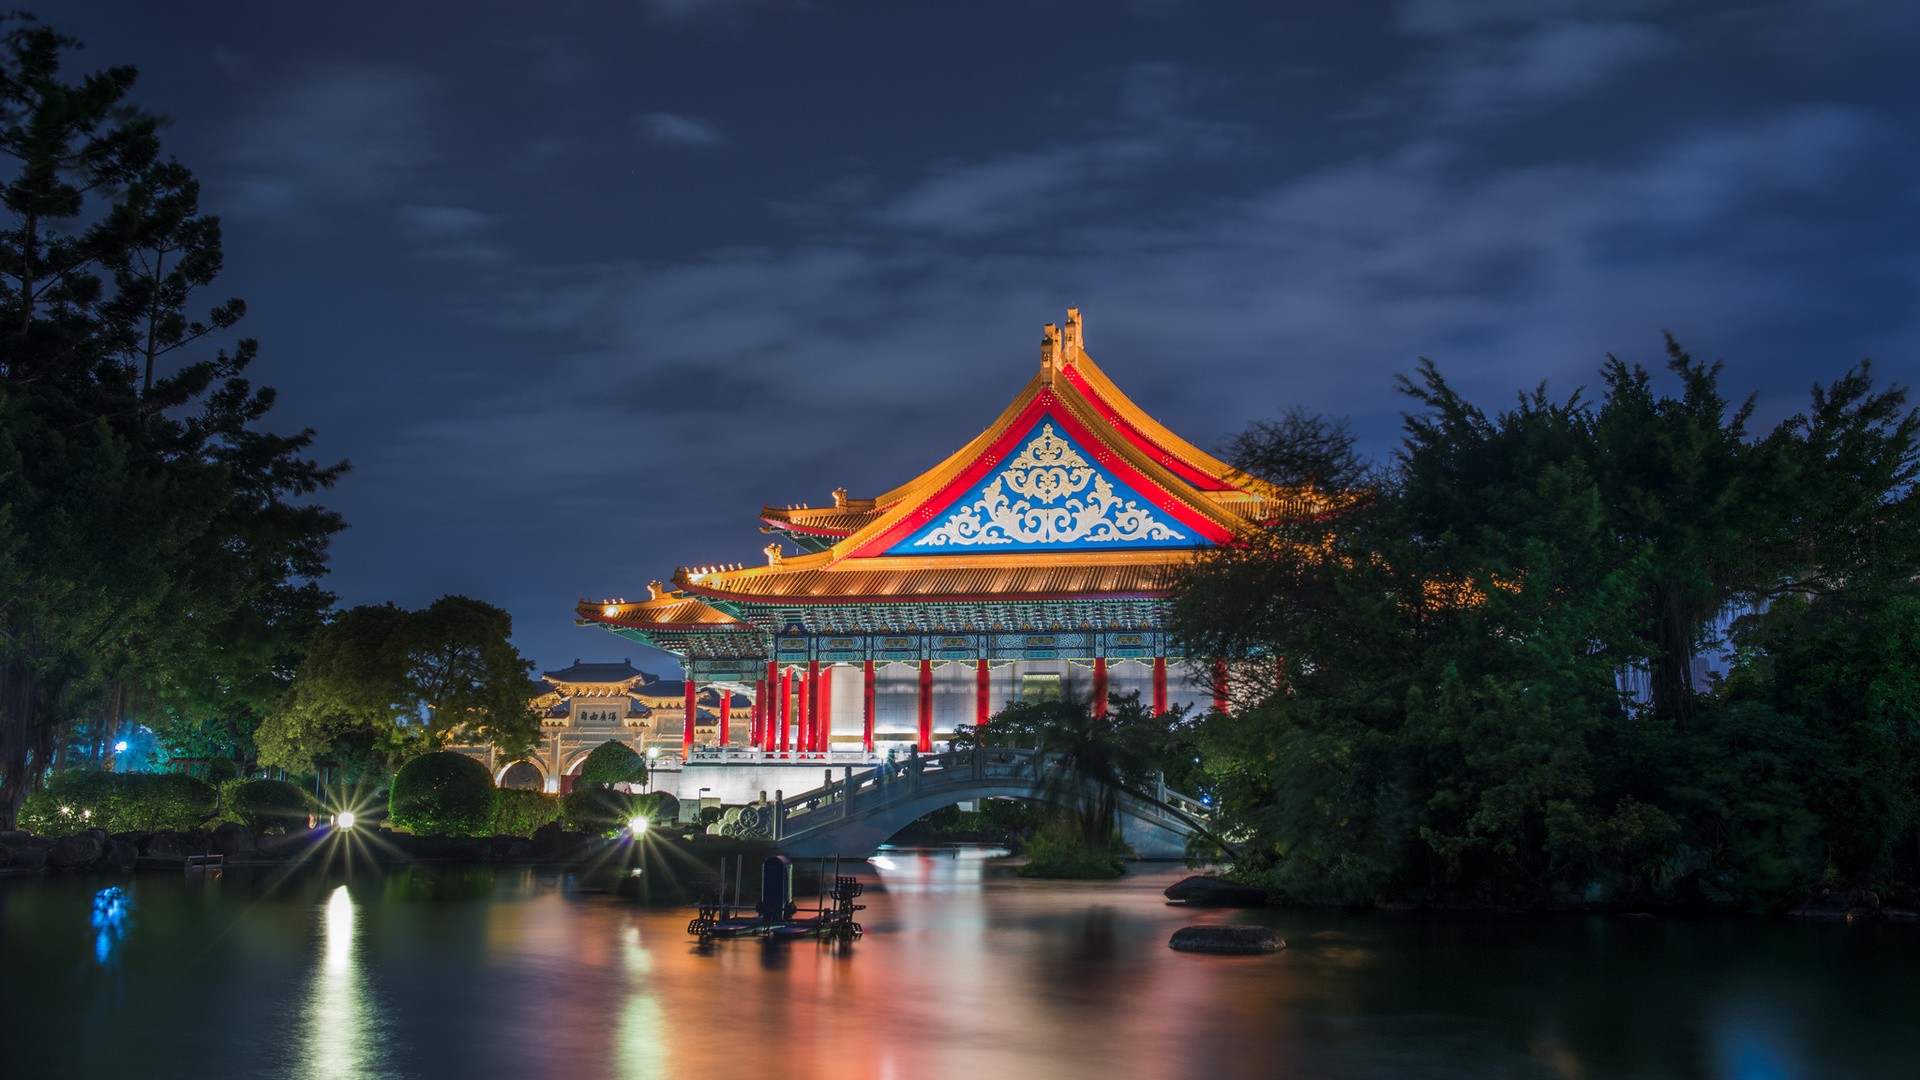 General 1920x1080 house lights nature trees night Asian architecture bridge Taipei Taiwan long exposure reflection theaters